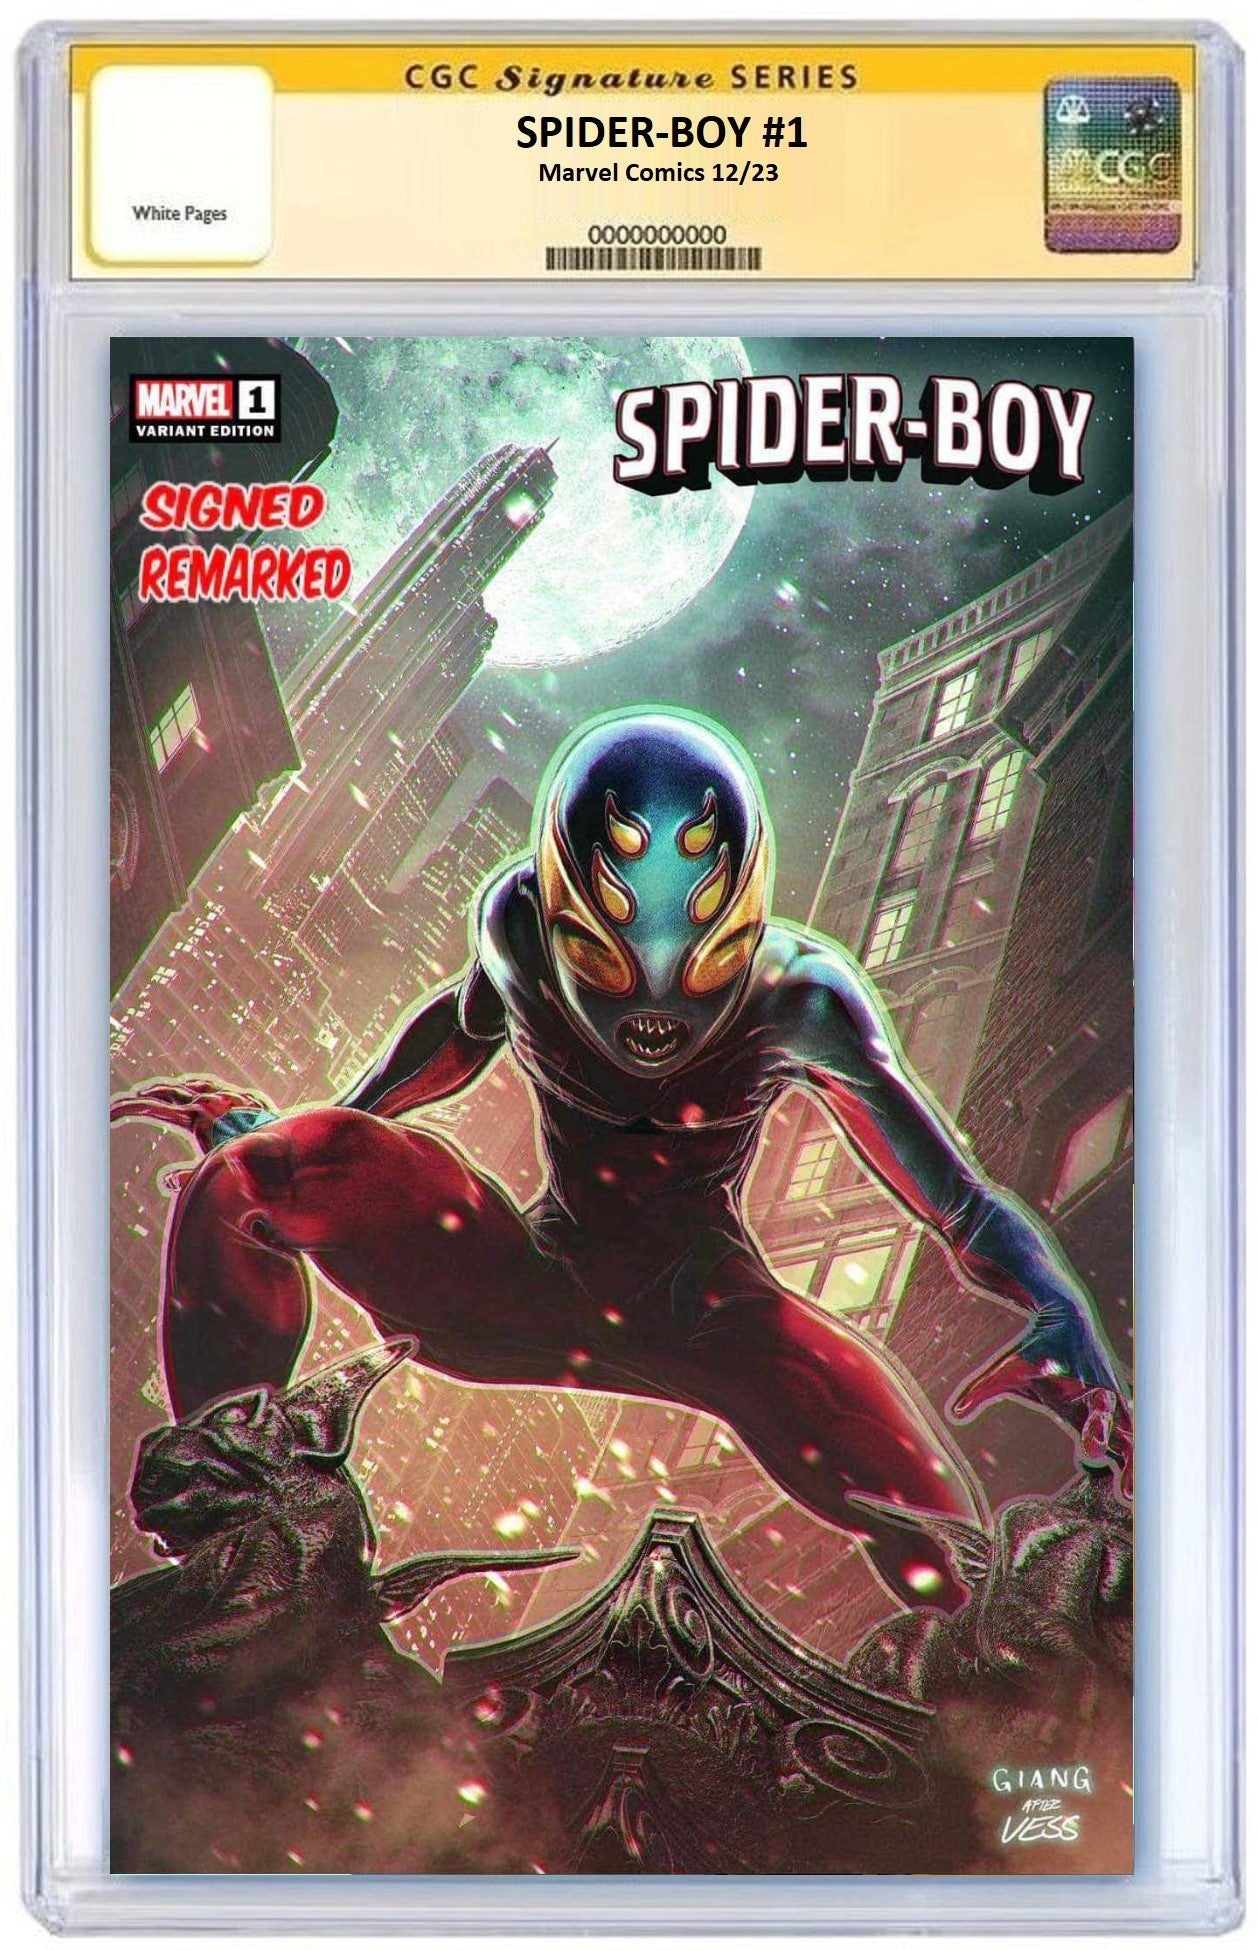 SPIDER-BOY #1 JOHN GIANG VARIANT LIMITED TO 1200 COPIES WITH NUMBERED COA CGC REMARK PREORDER